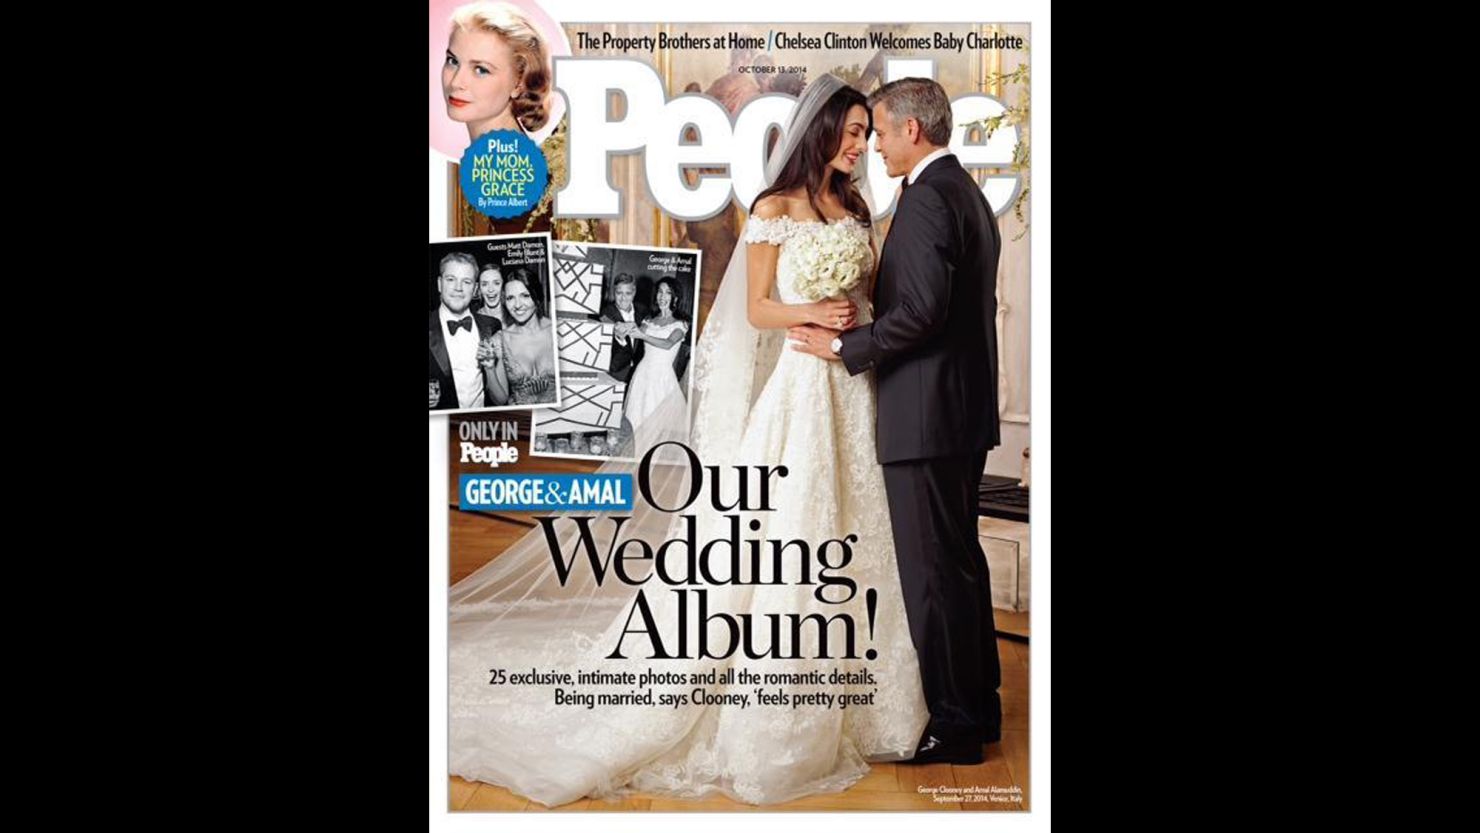 The cover of People magazine features the wedding of actor George Clooney and Amal Alamuddin.